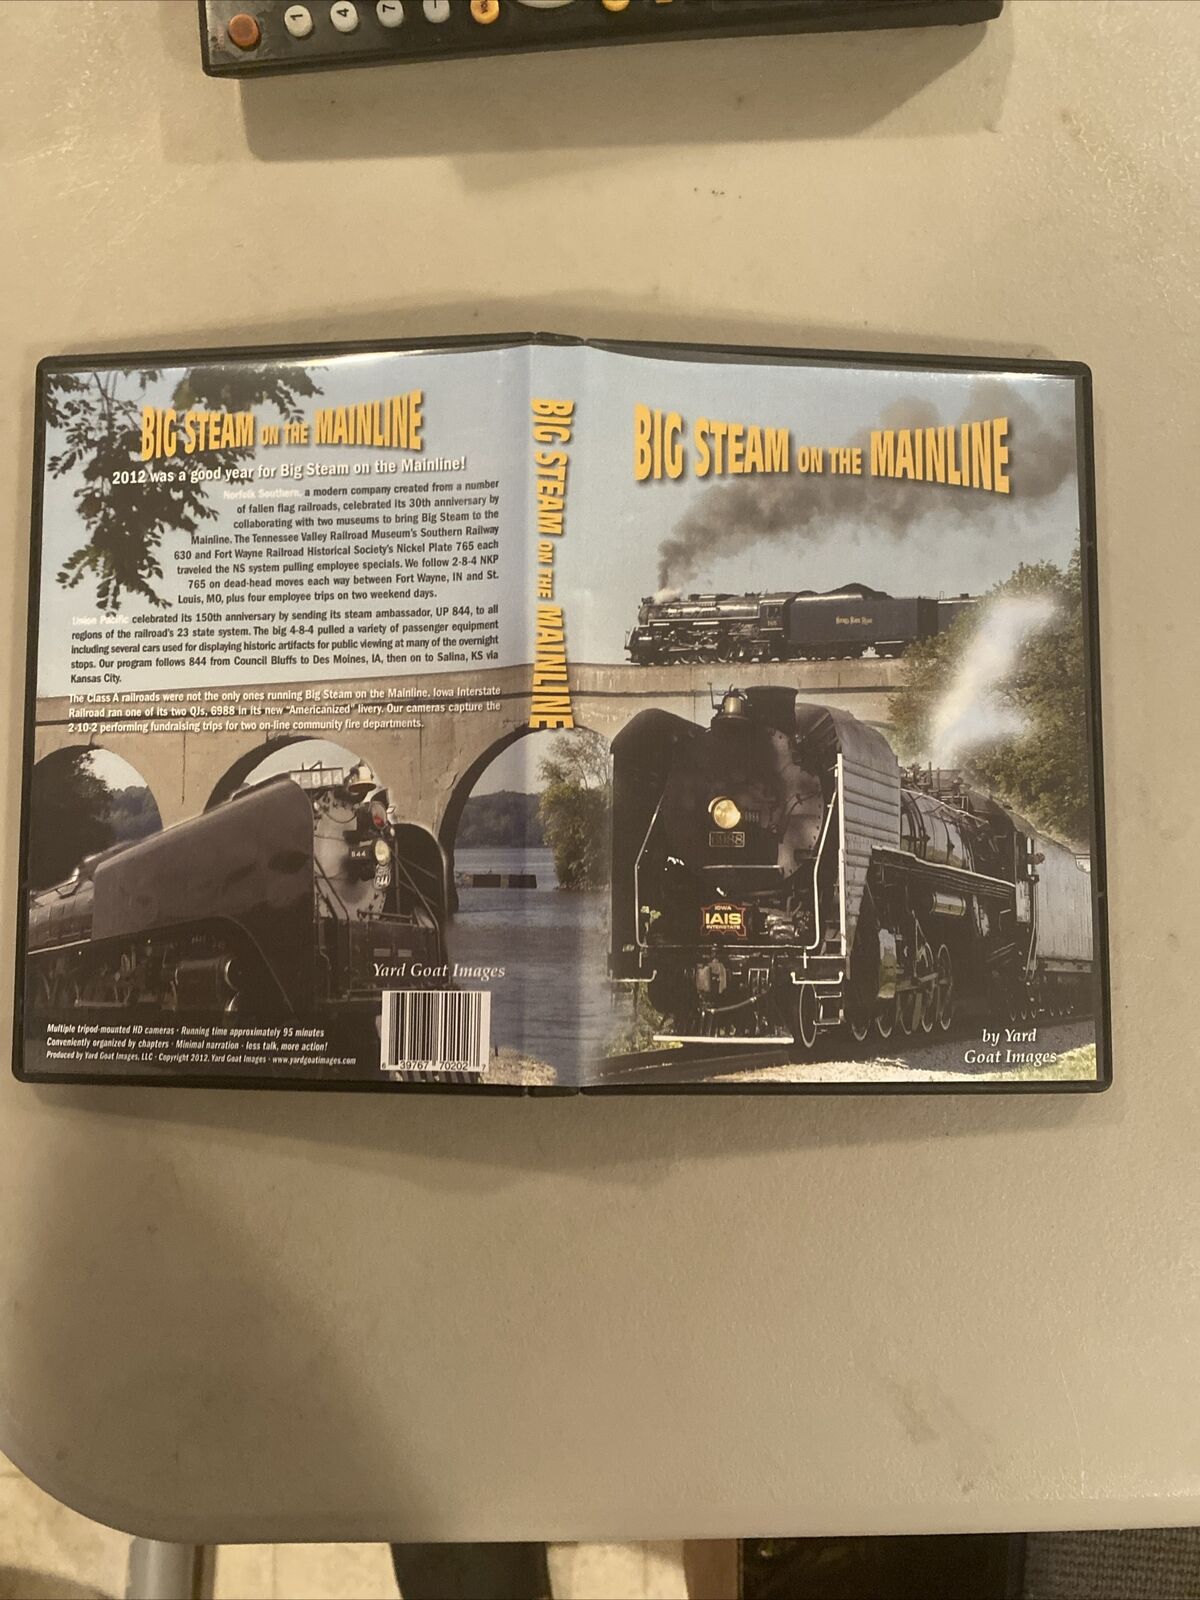 Big Steam Trains on the Mainline DVD 2012 Yard Goat Images 765 844 6988